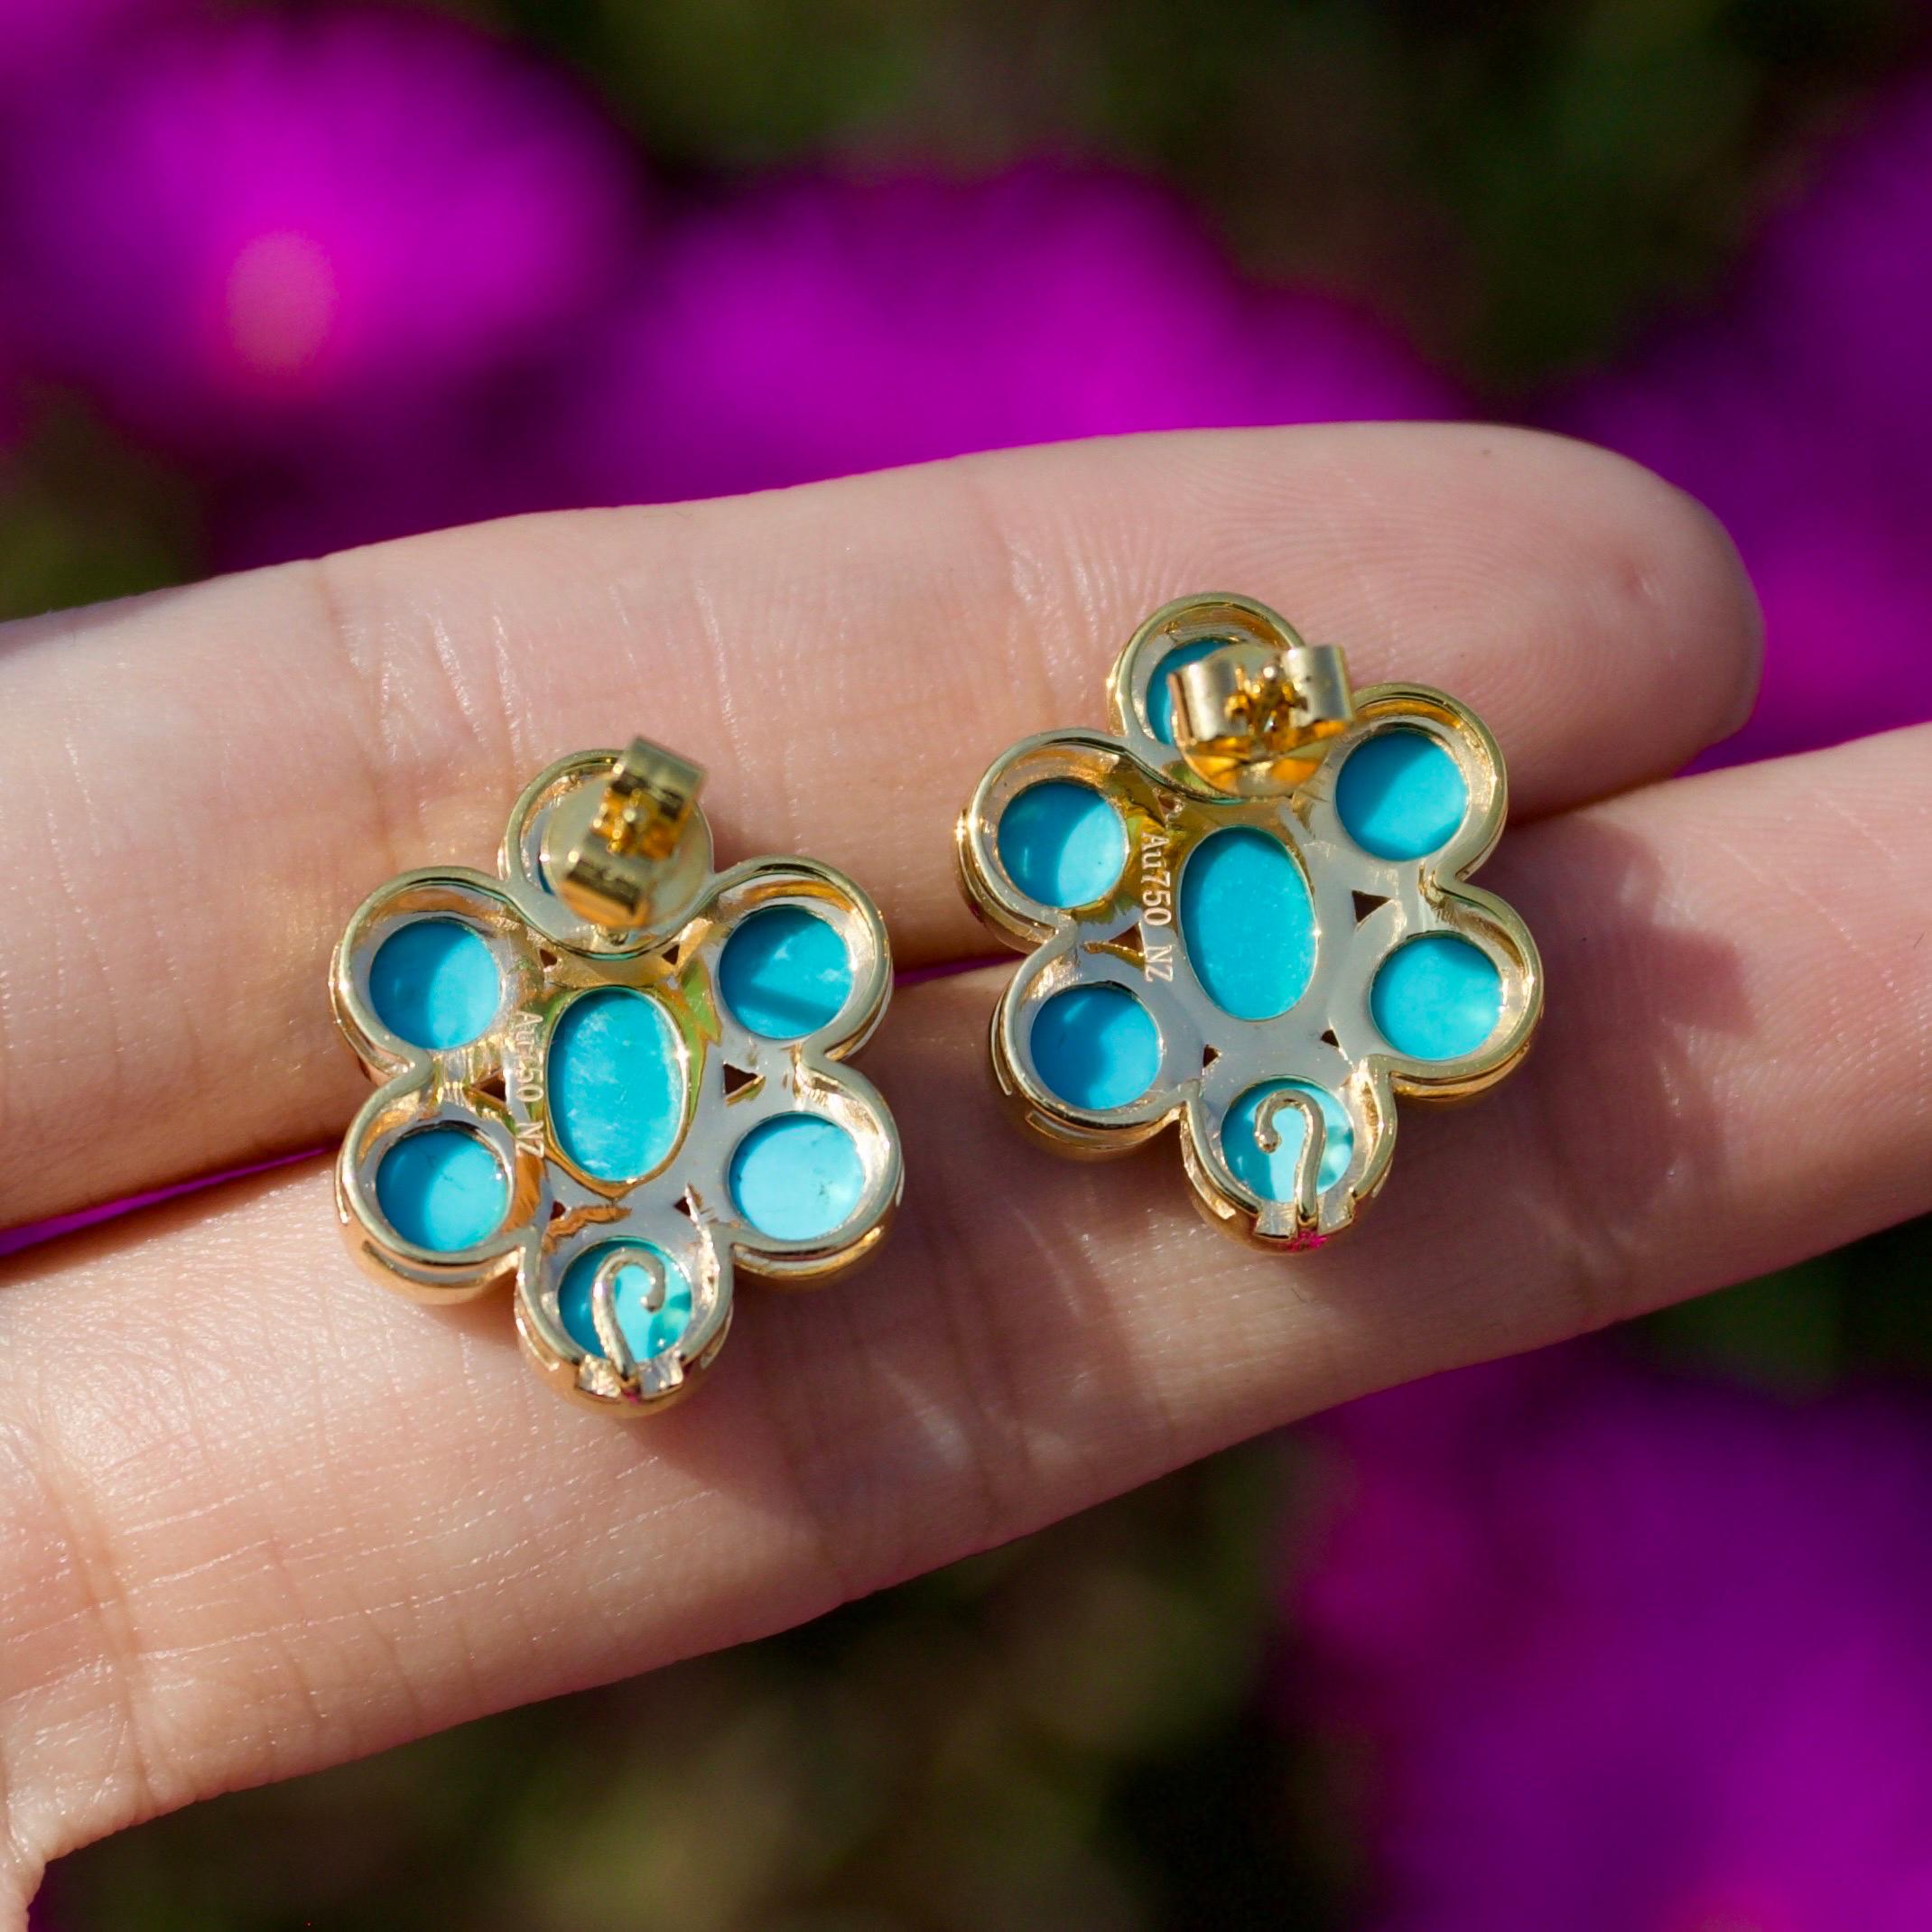 Nina Zhou 8ct Blue Turquoise Gemstone Cluster Earrings in 18k Yellow Gold For Sale 1